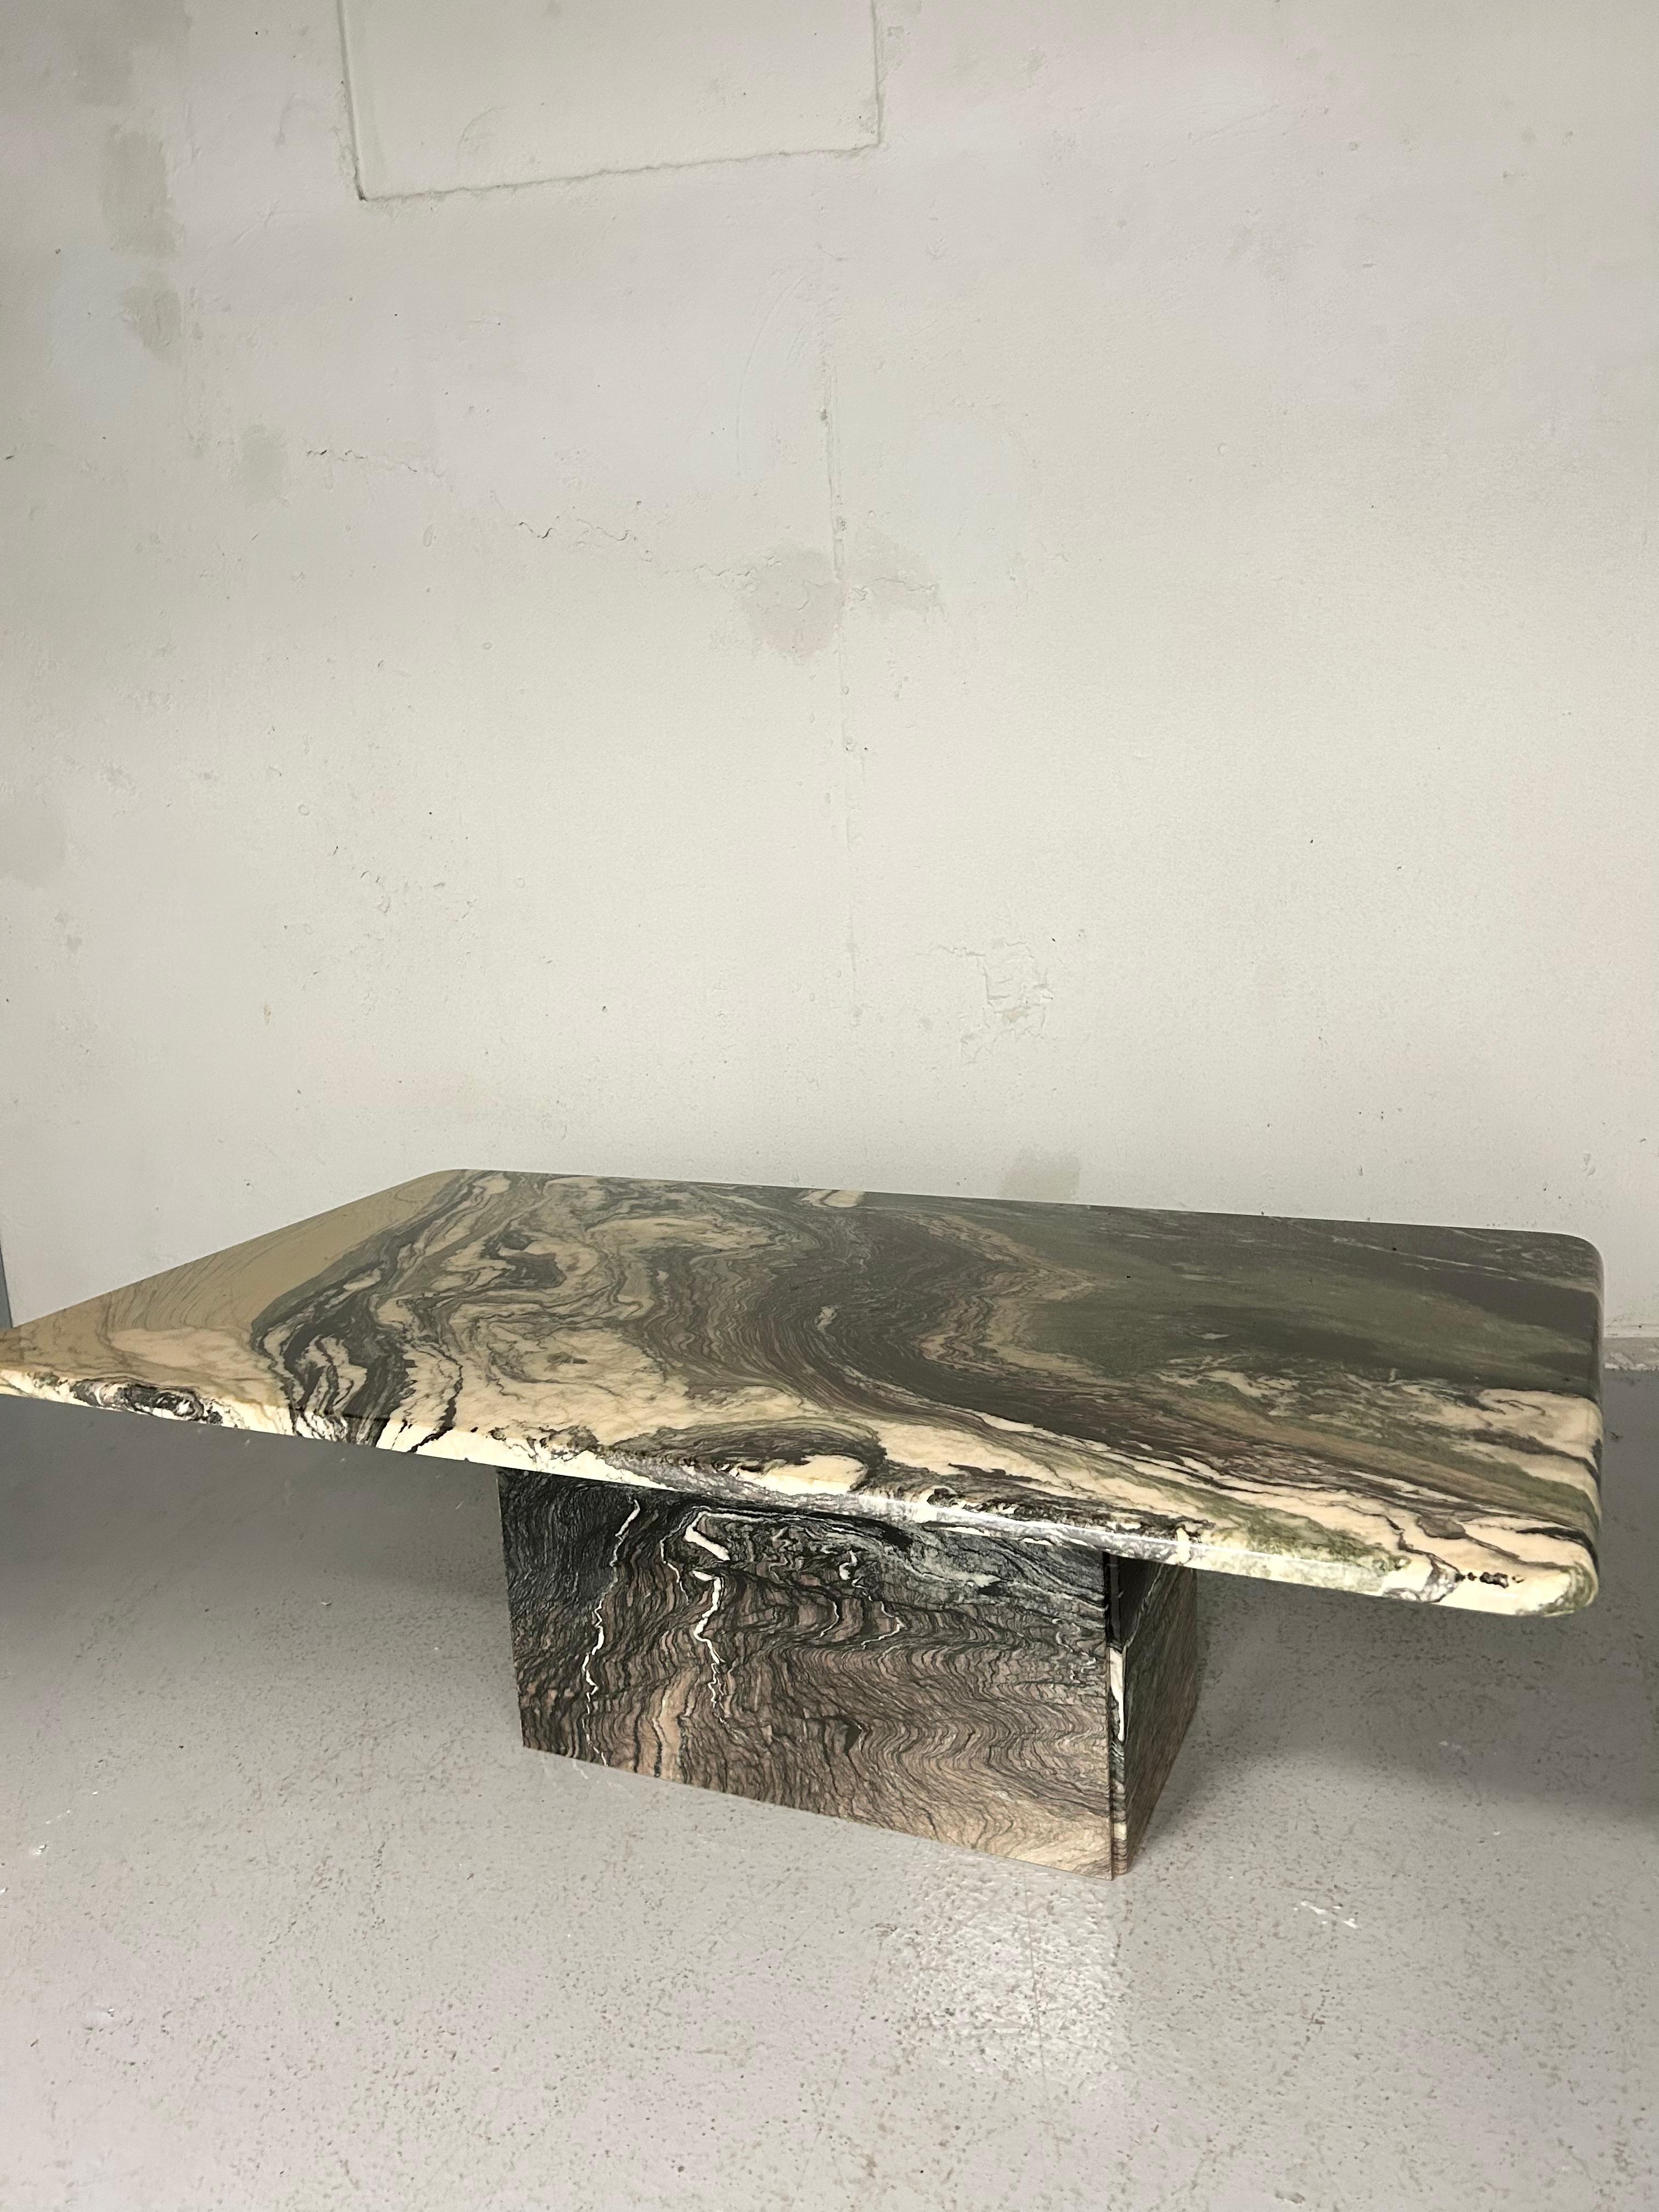 Vintage Cipollino Ondulato marble coffee table. Beautiful layers of color. Minimal wear. The top separates from the base. Base is hollow rectangle also made of cipollino ondulato marble.